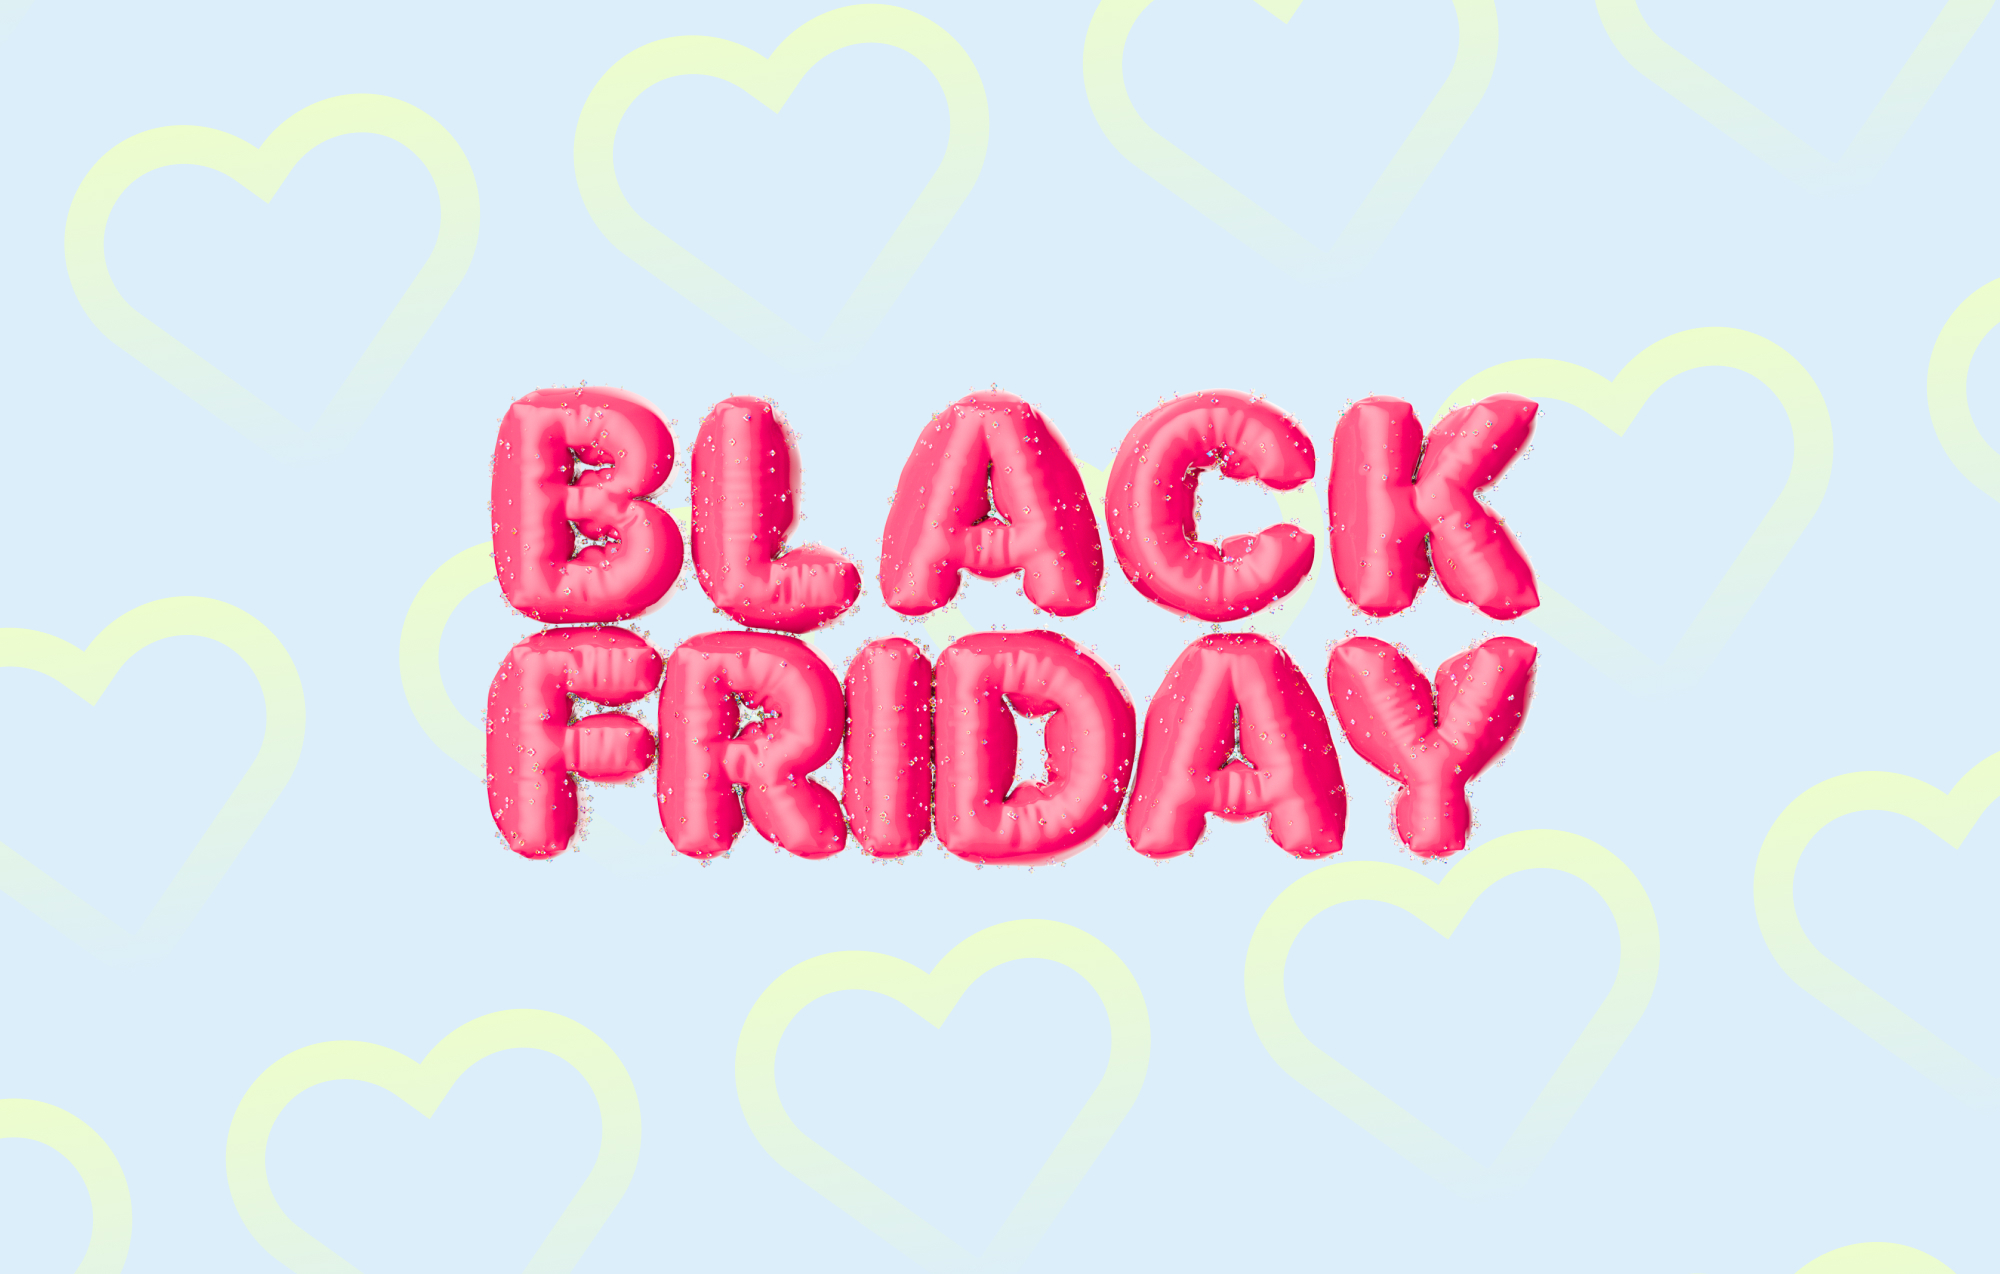 Black Friday blog post by charles about WhatsApp campaign ideas – giant pink black friday letters on a blue heart background